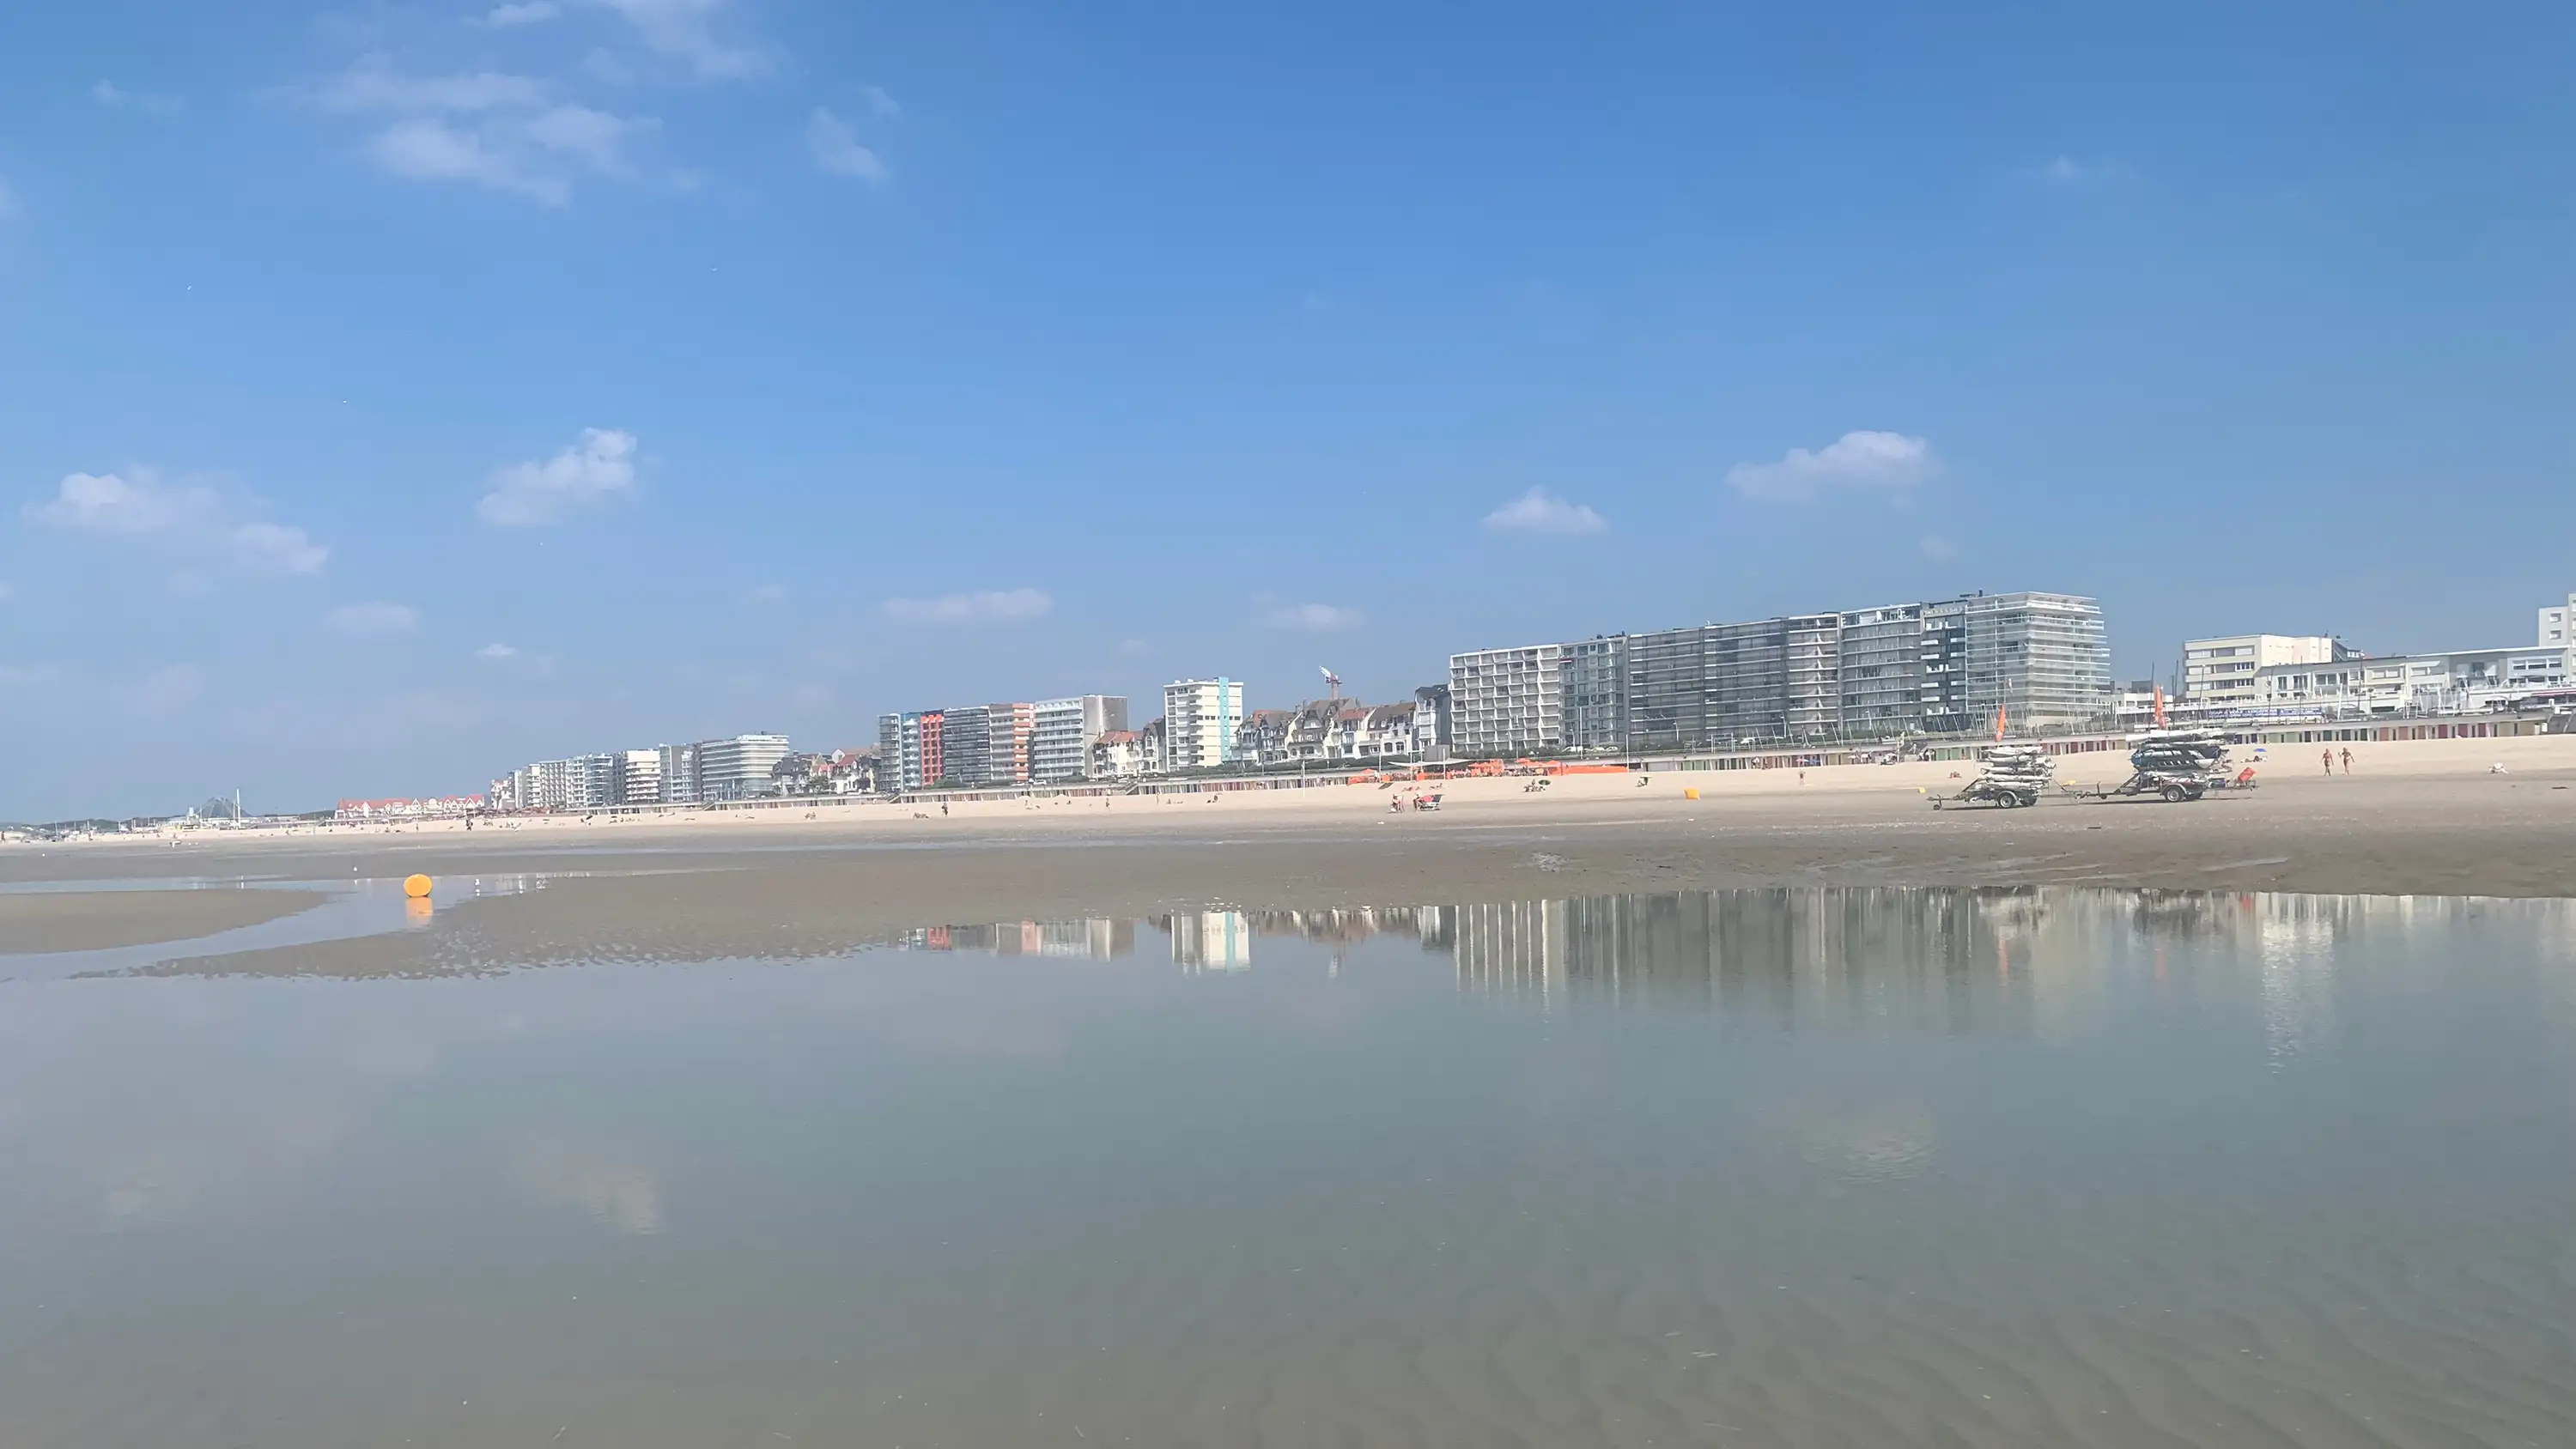 A view back at the seafront in Le Touquet, and its apartment buildings, from the beach at low tide